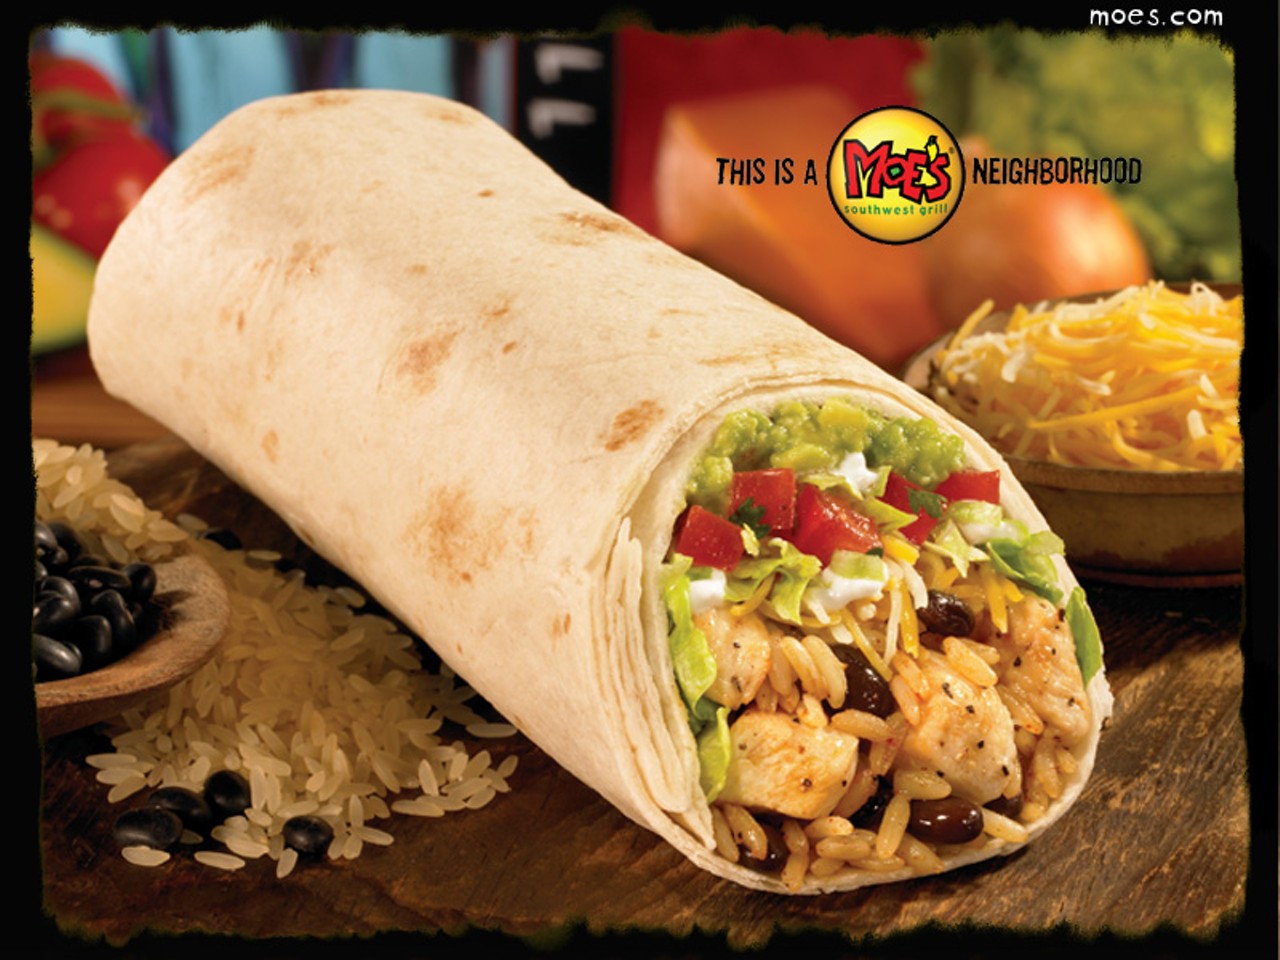 On your birthday, Moe's emails you a coupon for a free burrito.